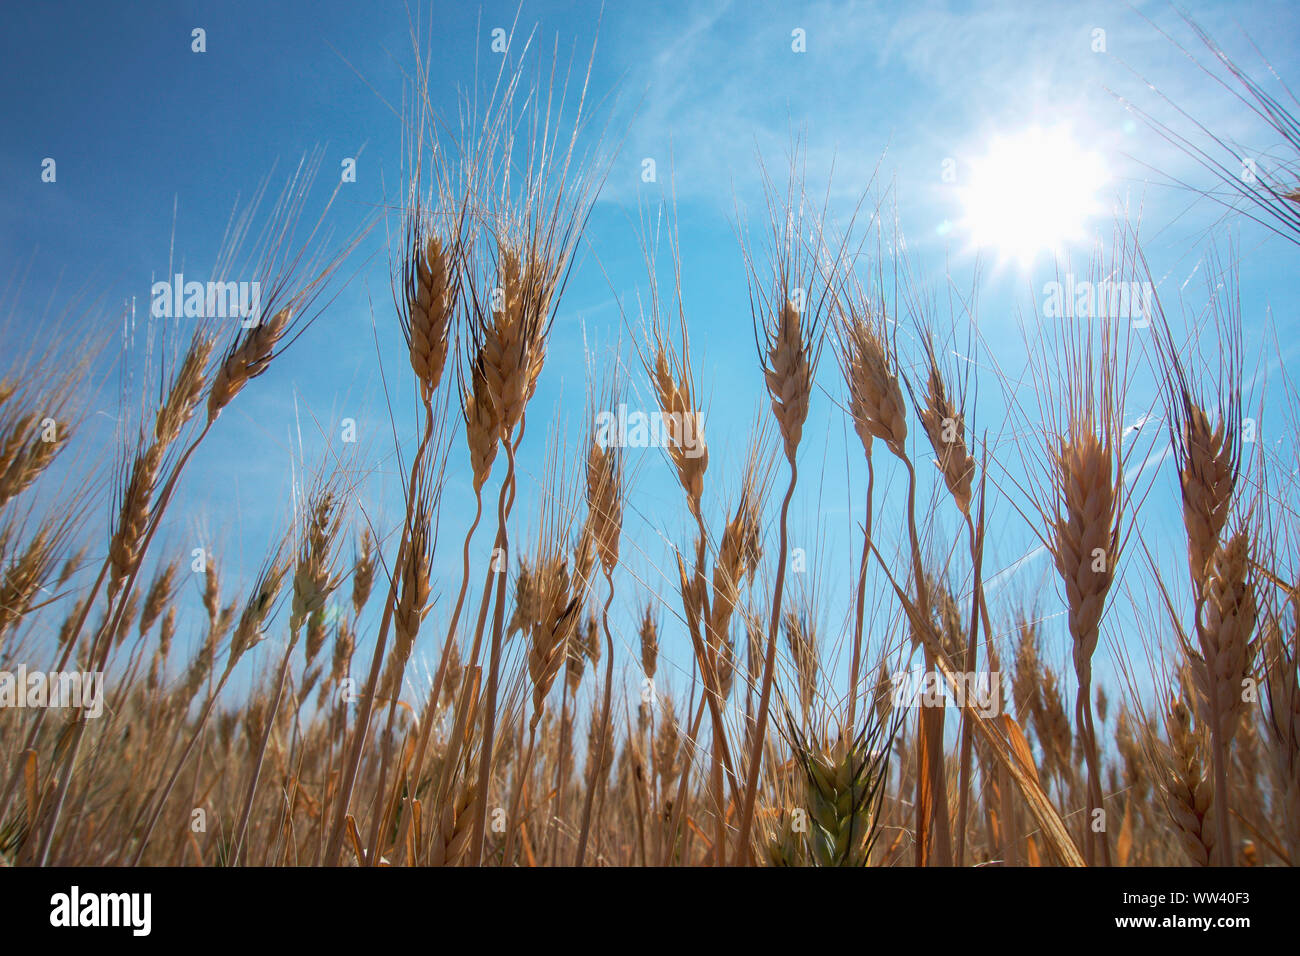 Harvest ready grains in an agricultural field in Southern Canada with blue sky and sun in the background Stock Photo